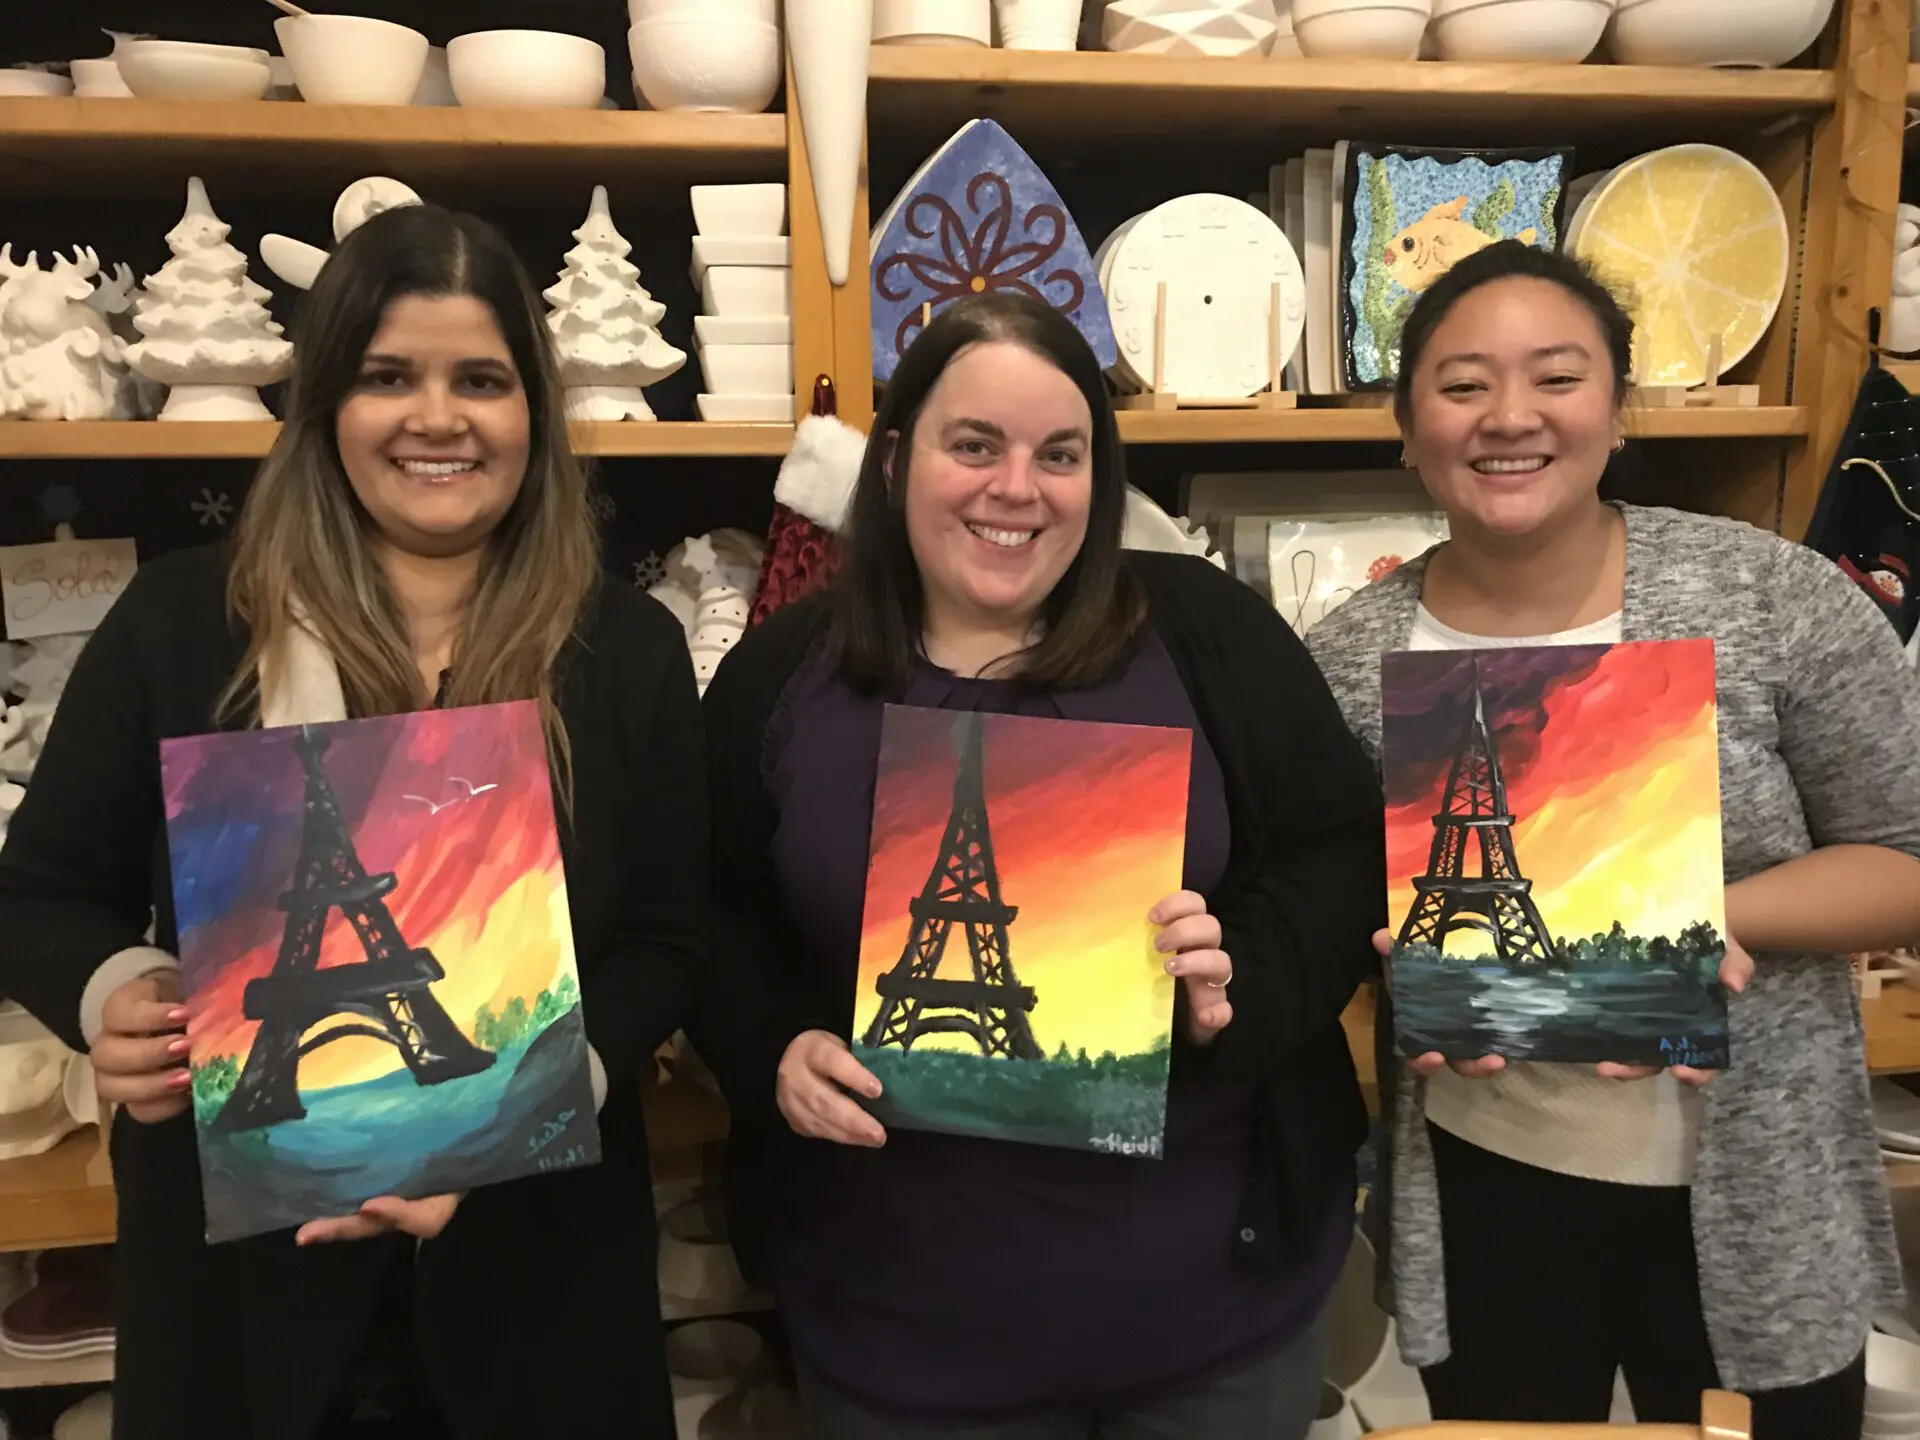 Group of Women holding pairs tower painting and smiling for camera